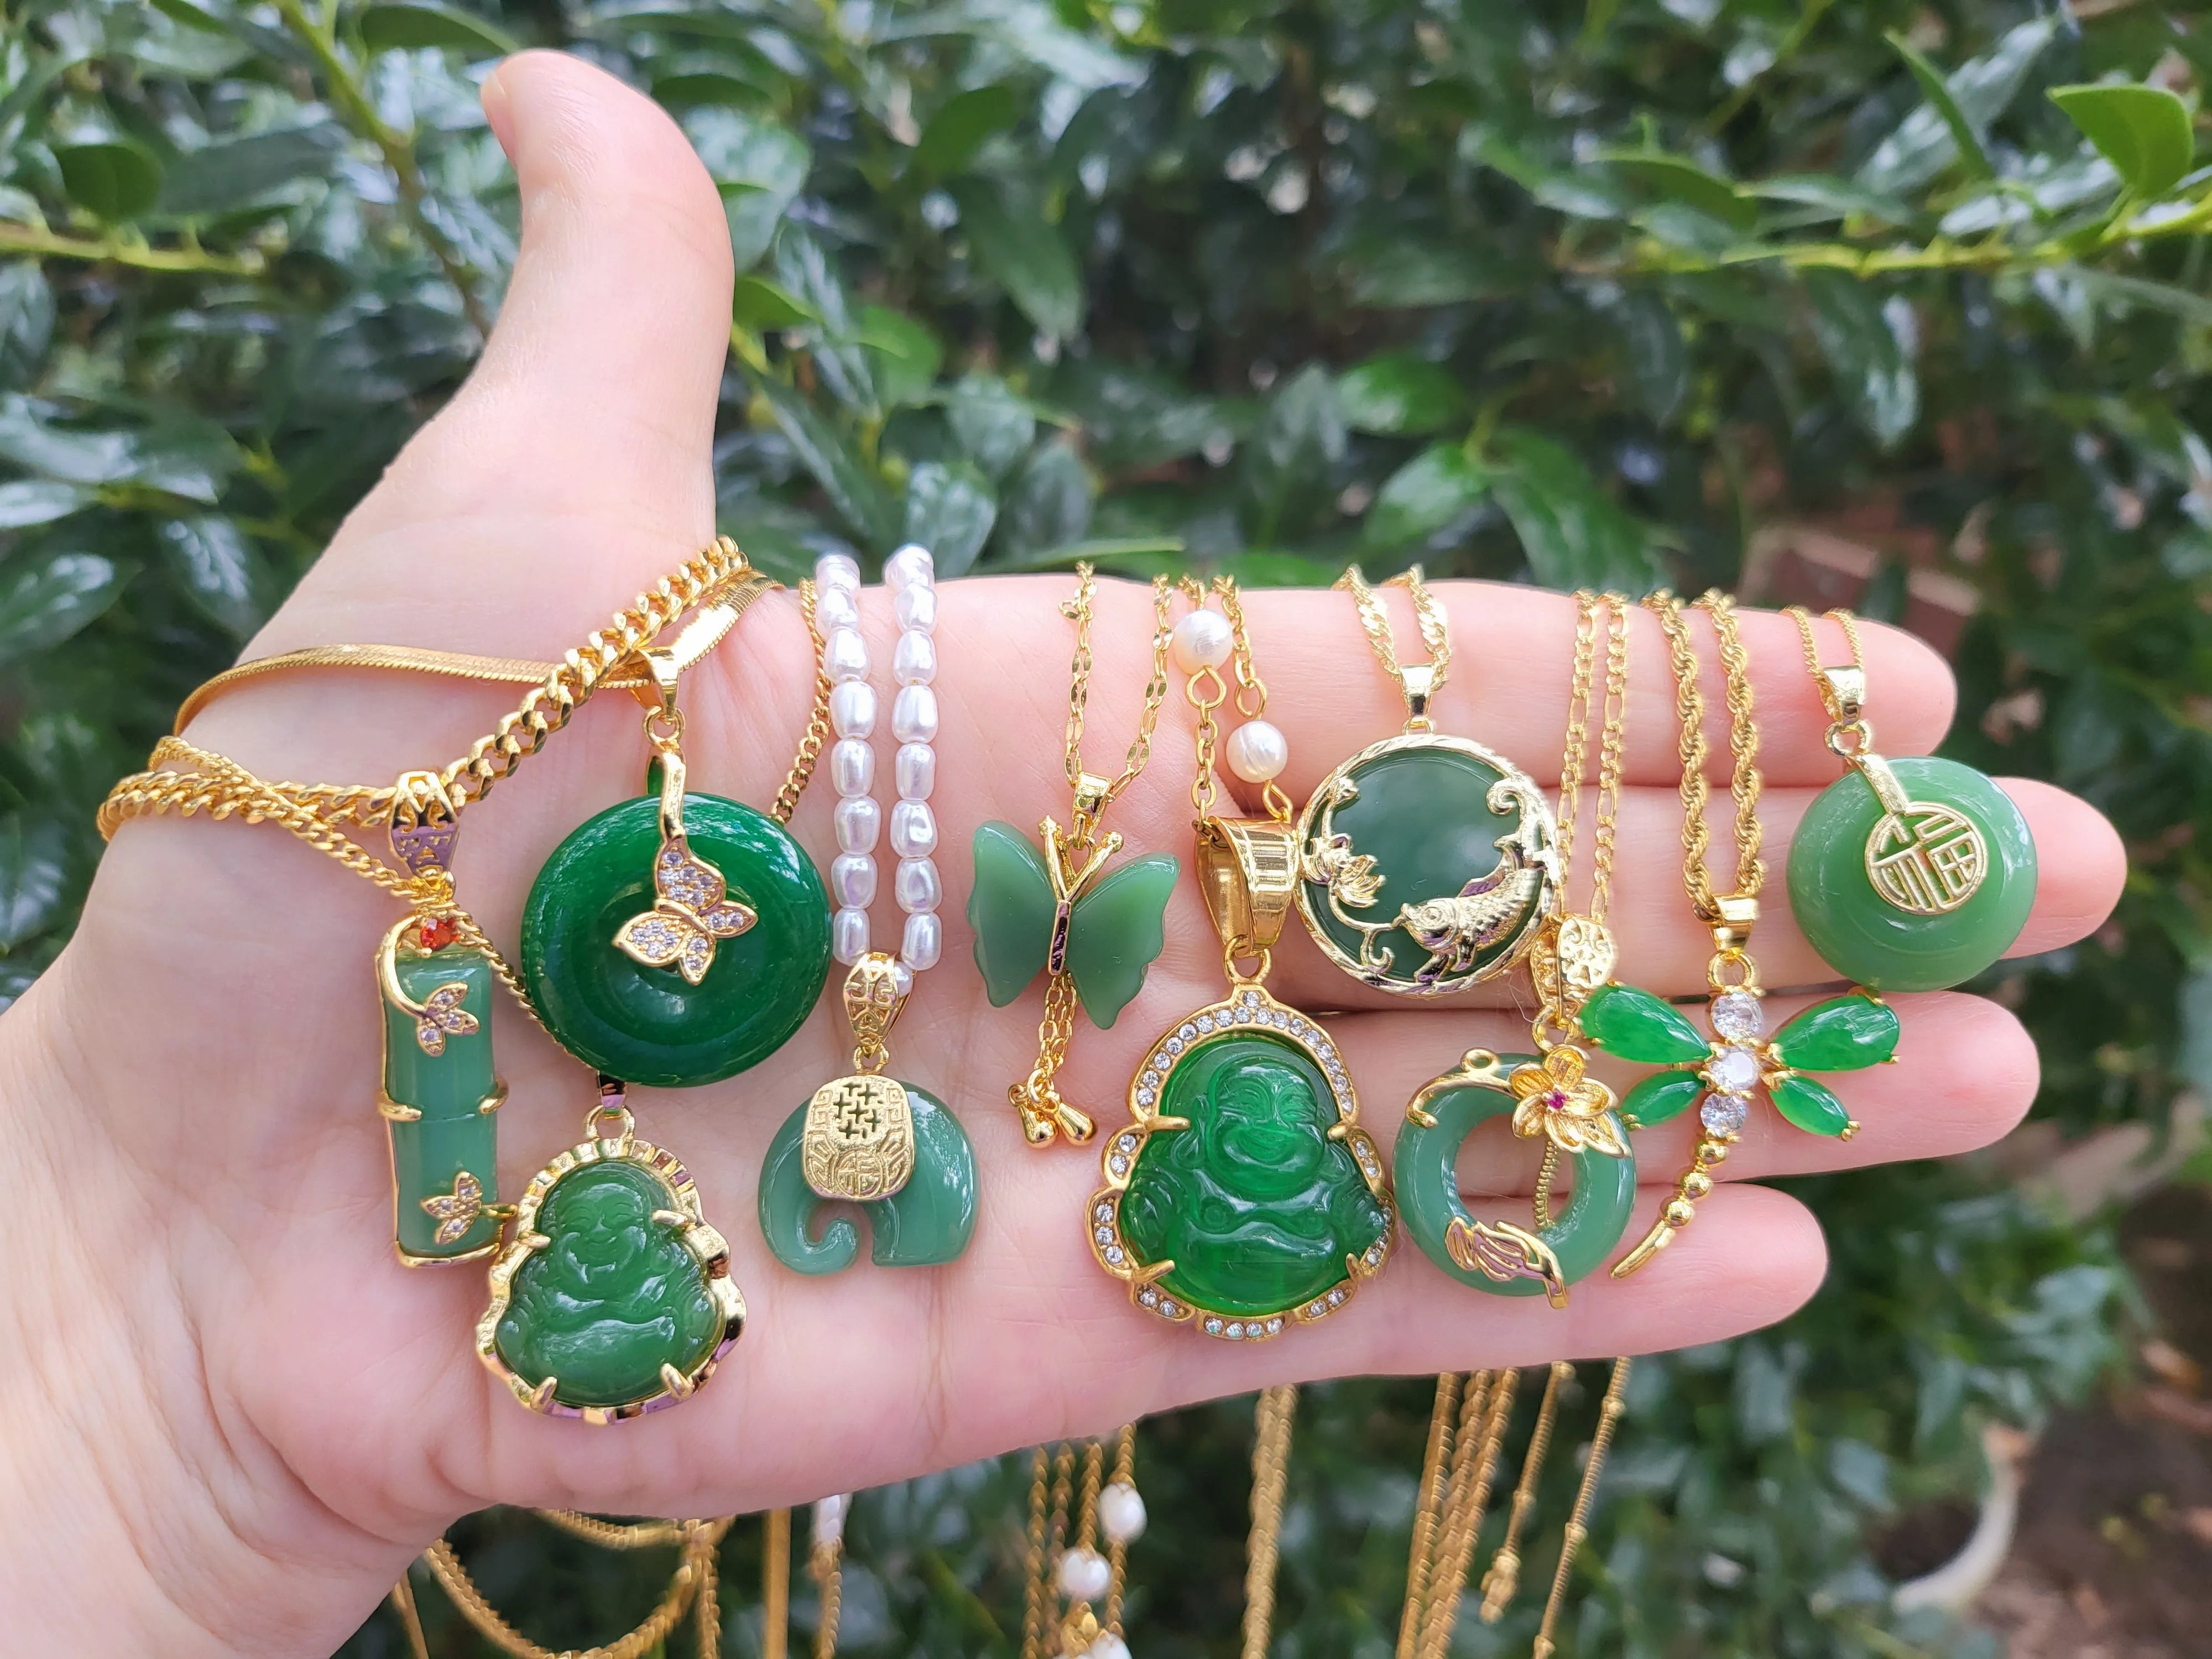 Gold Filled Green Jade Necklace product images.